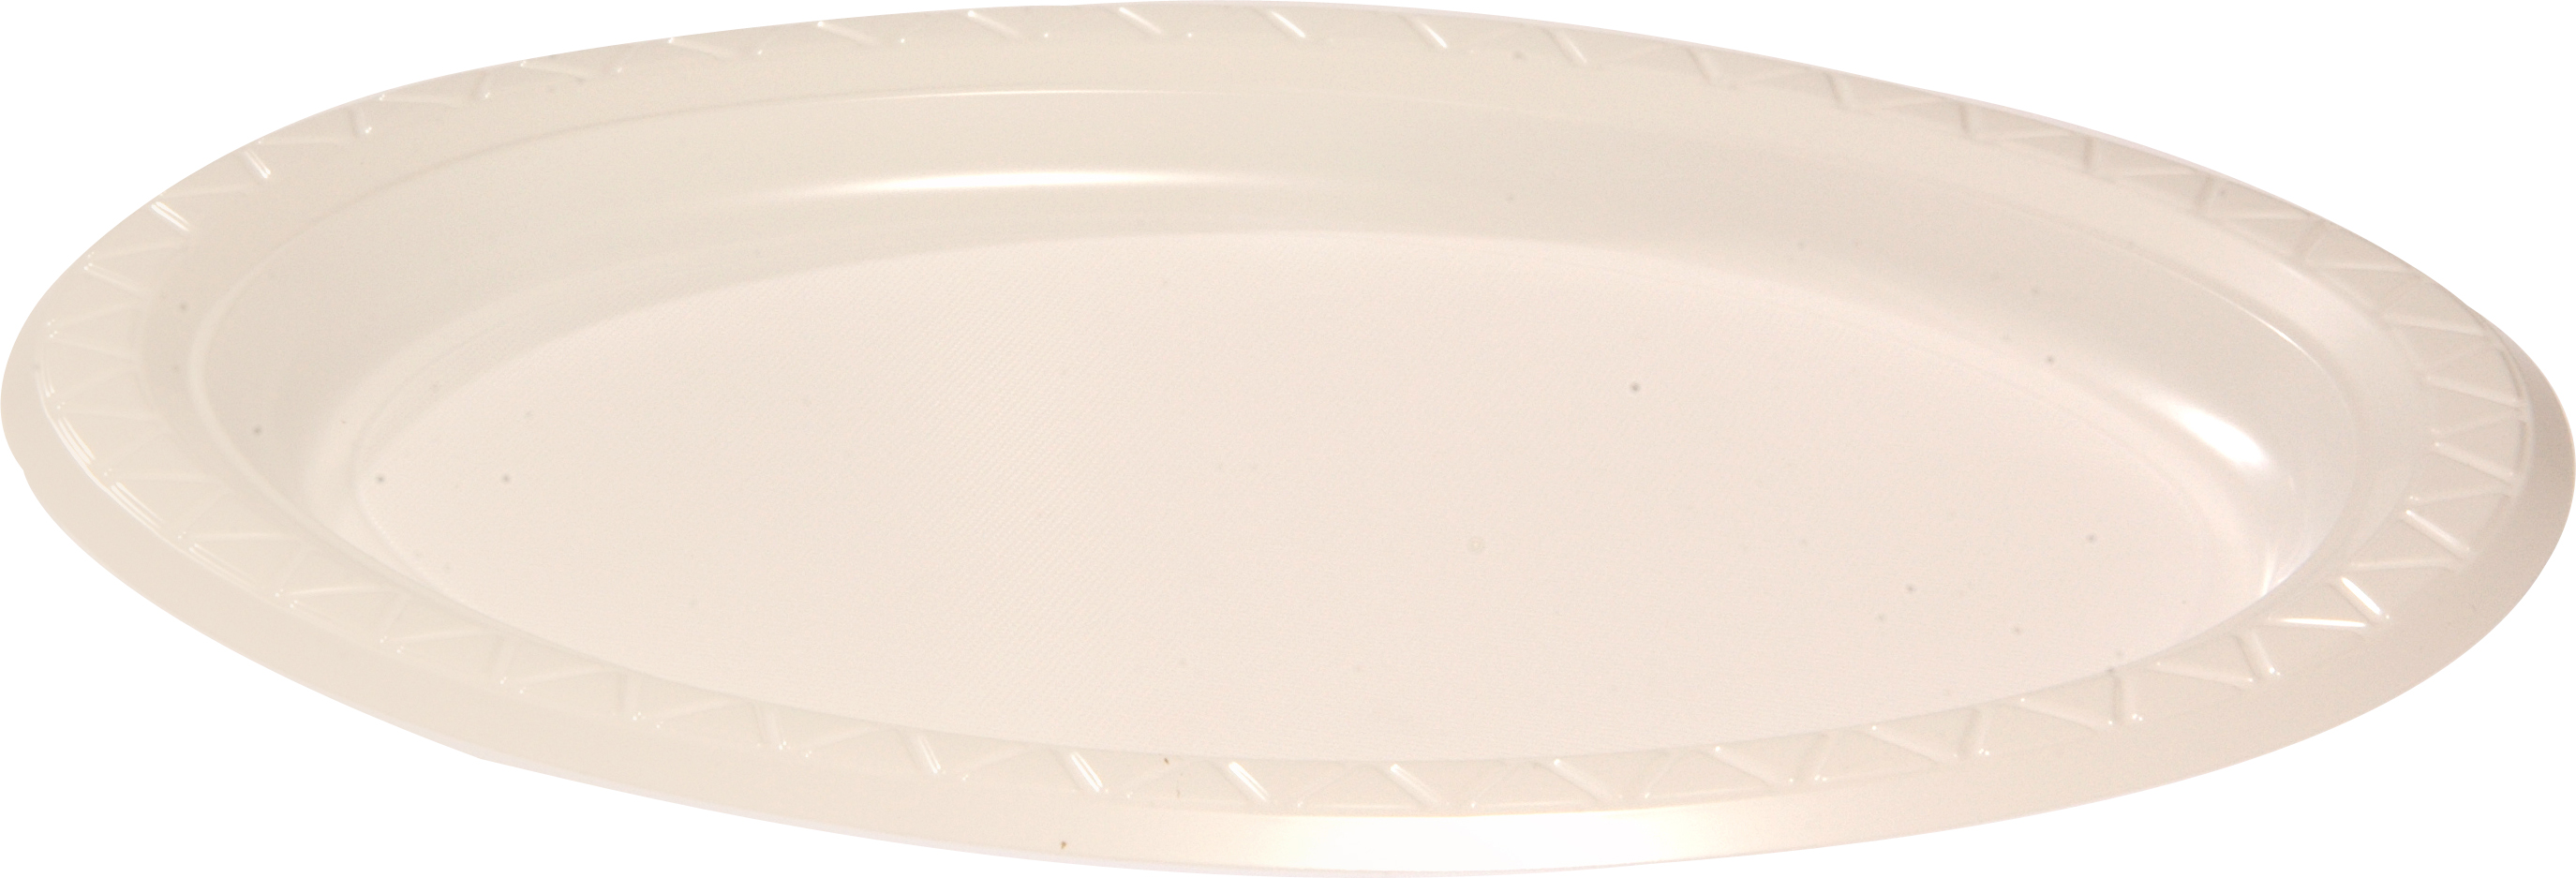 Plastic Plate Oval White 11 x 8.5″